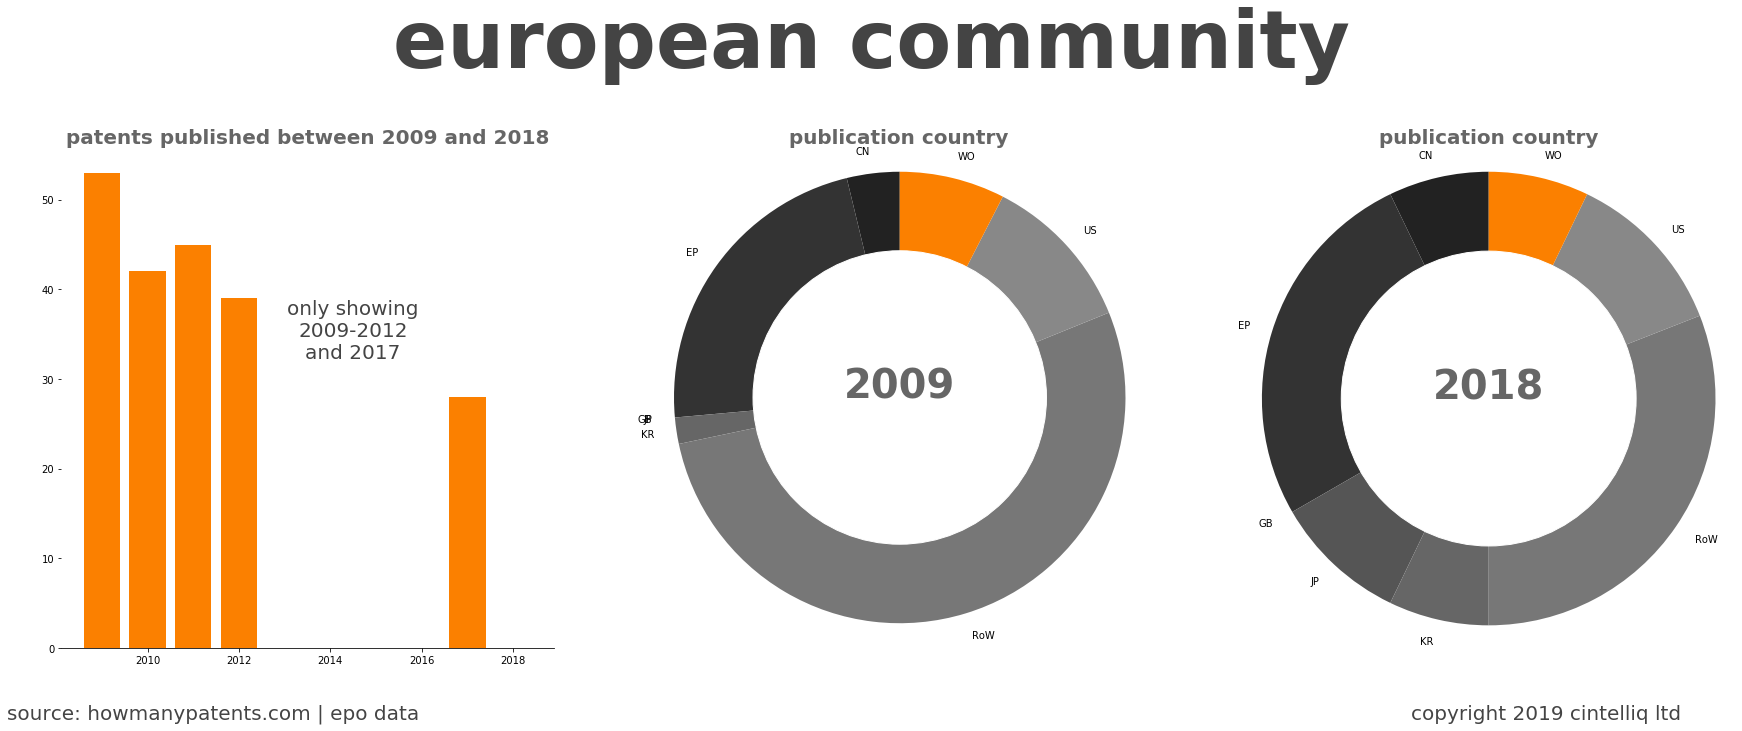 summary of patents for European Community